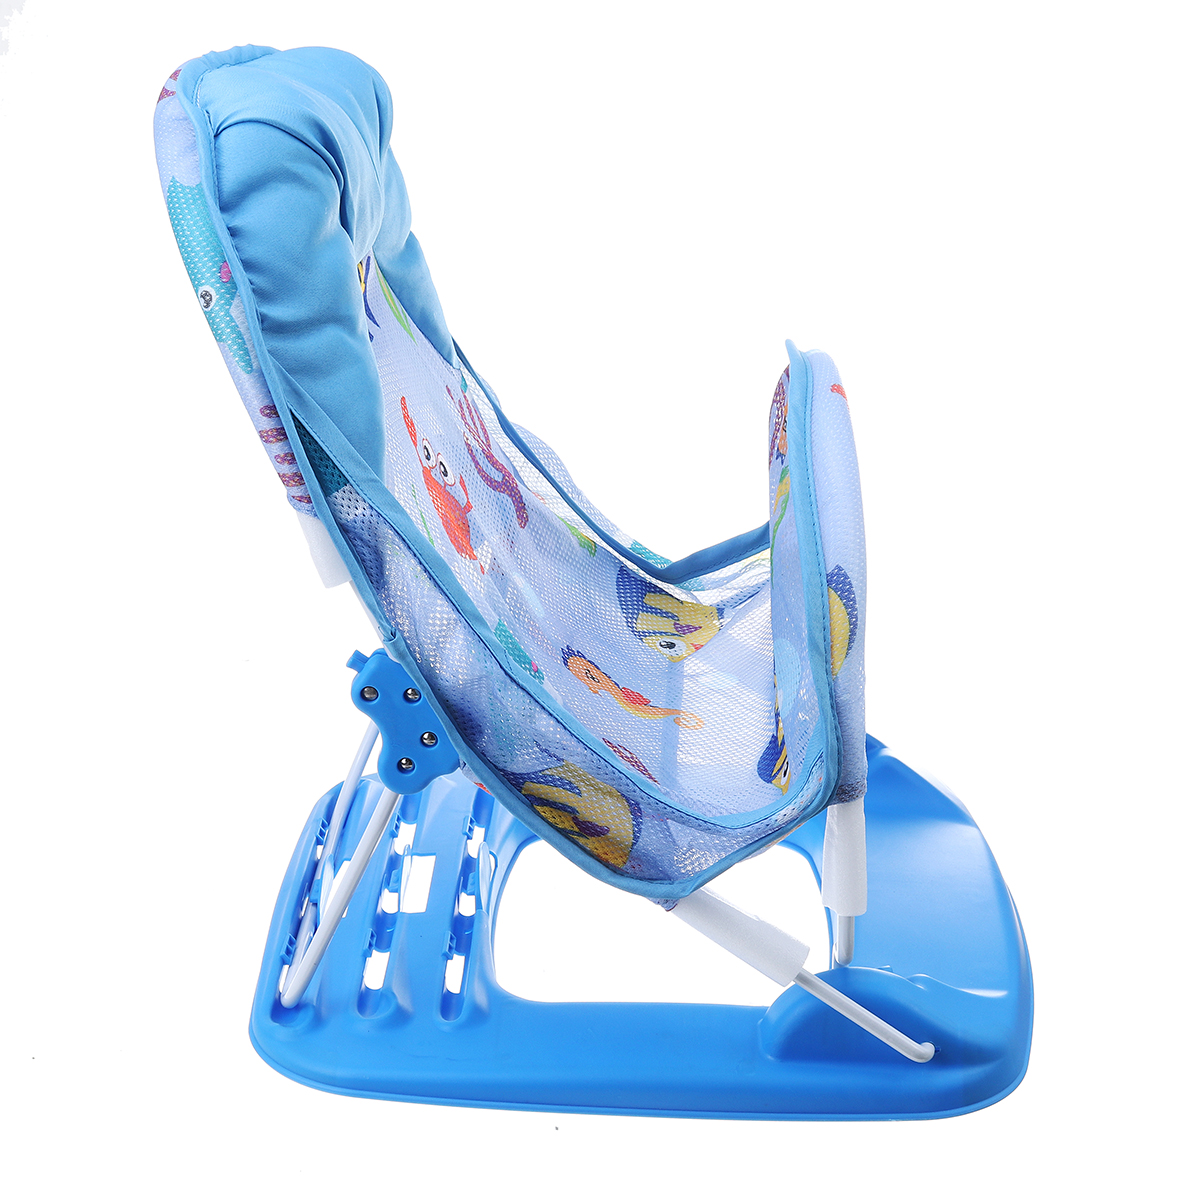 Baby-Swing-Seat-Folding-Portable-Baby-Bath-Shower-Chair-for-012-Month-Baby-1878834-4